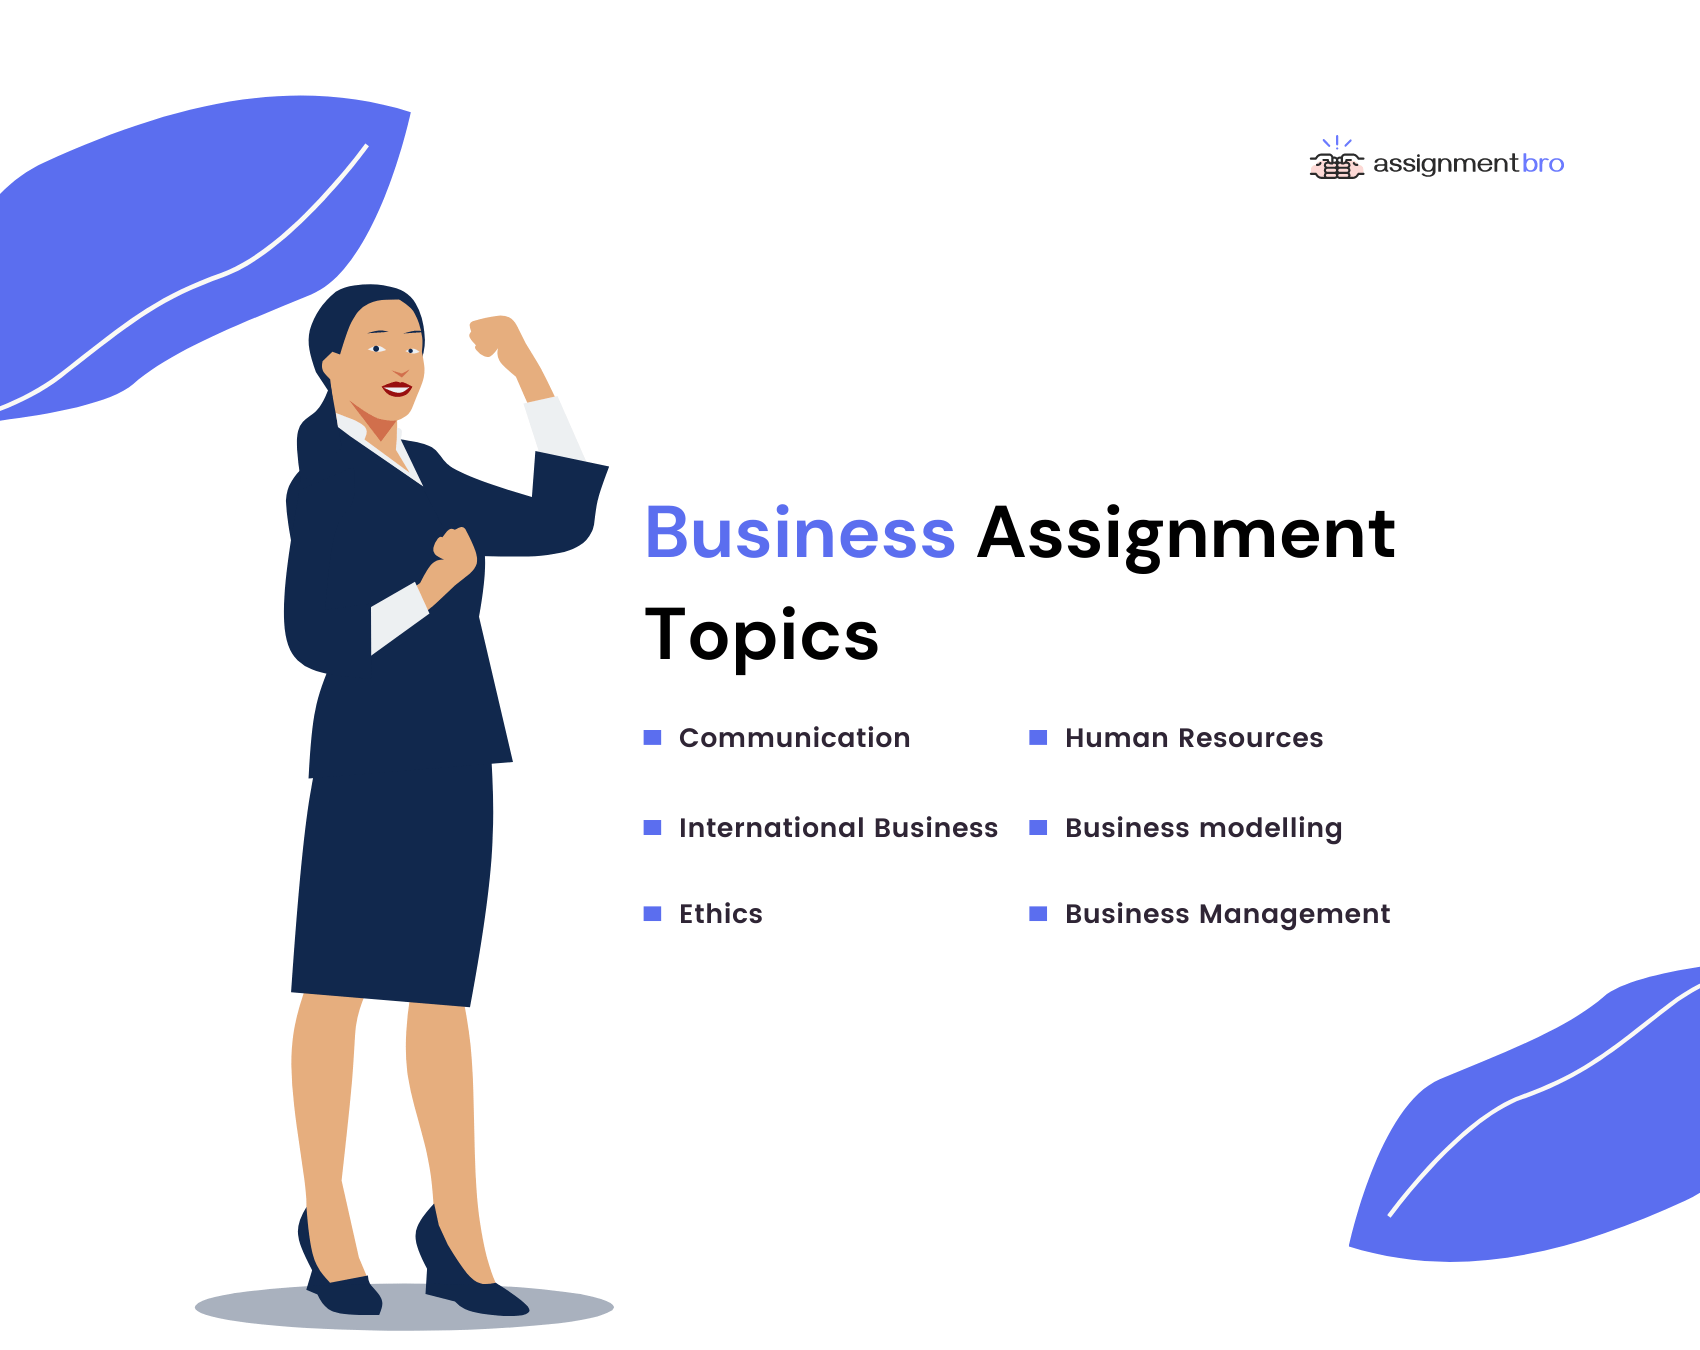 Business Assignment Topics